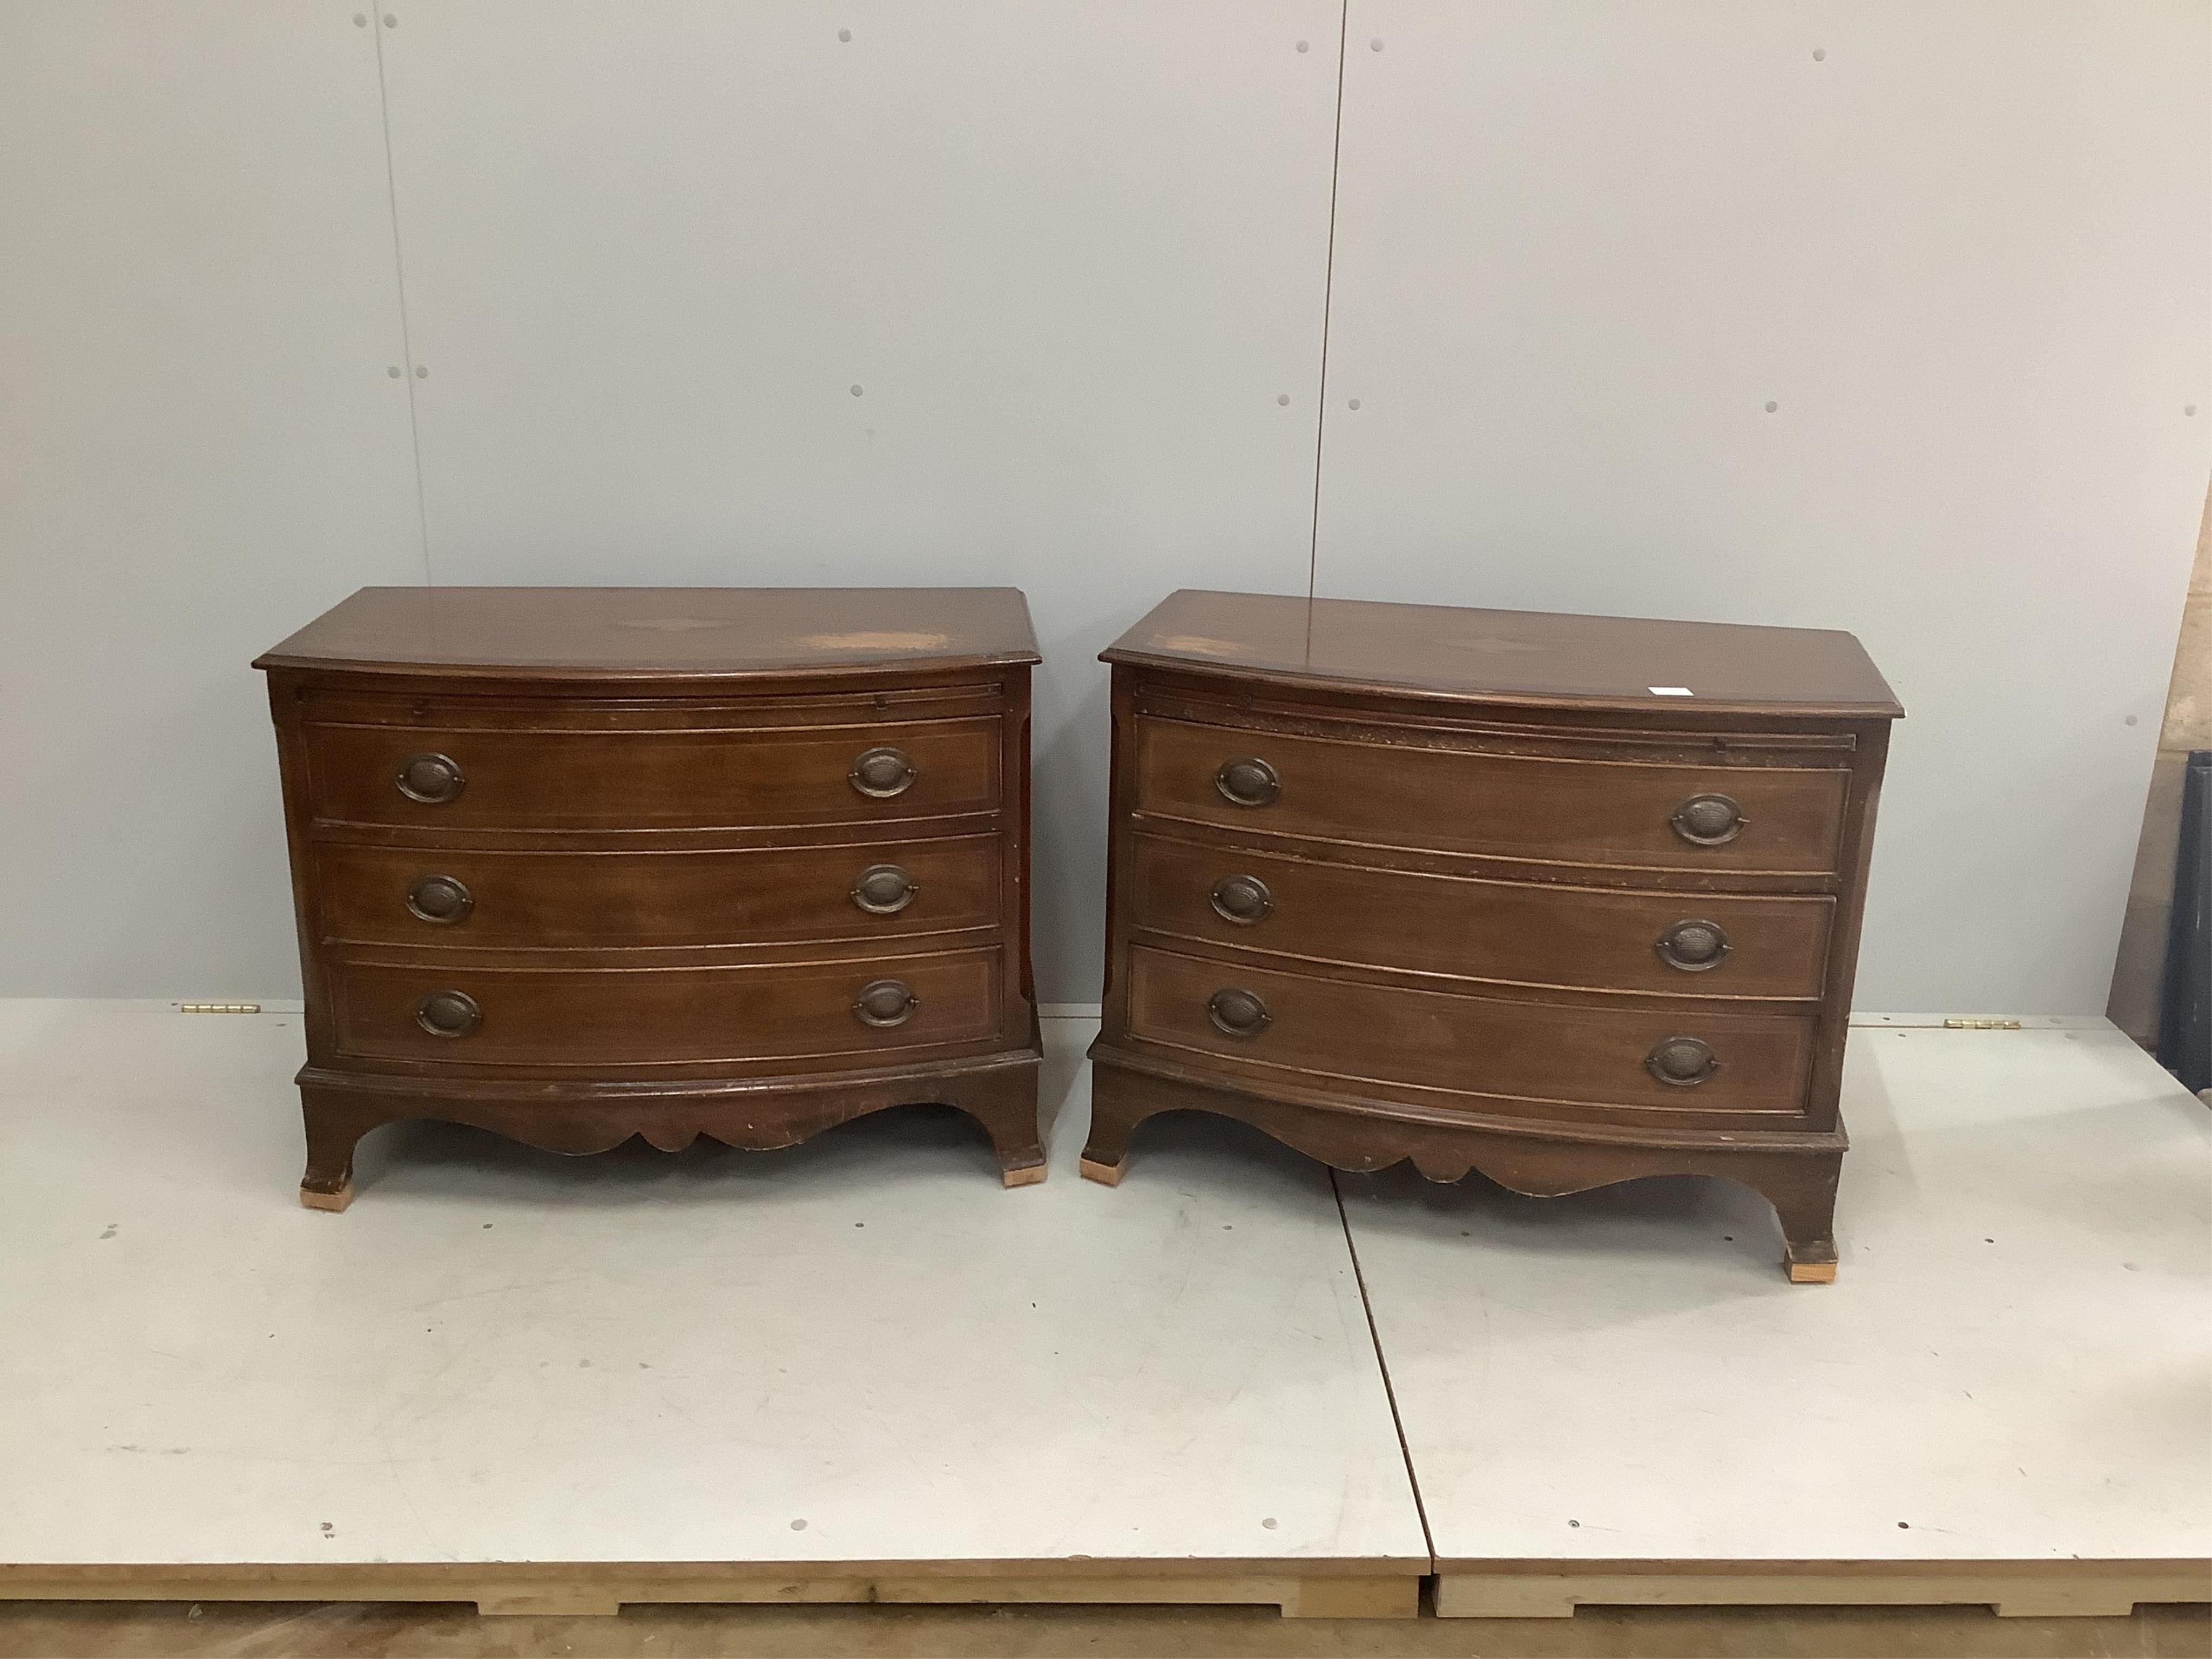 A pair of reproduction inlaid mahogany bow front chests of three long drawers, width 87cm, depth 49cm, height 68cm. Condition - poor to fair